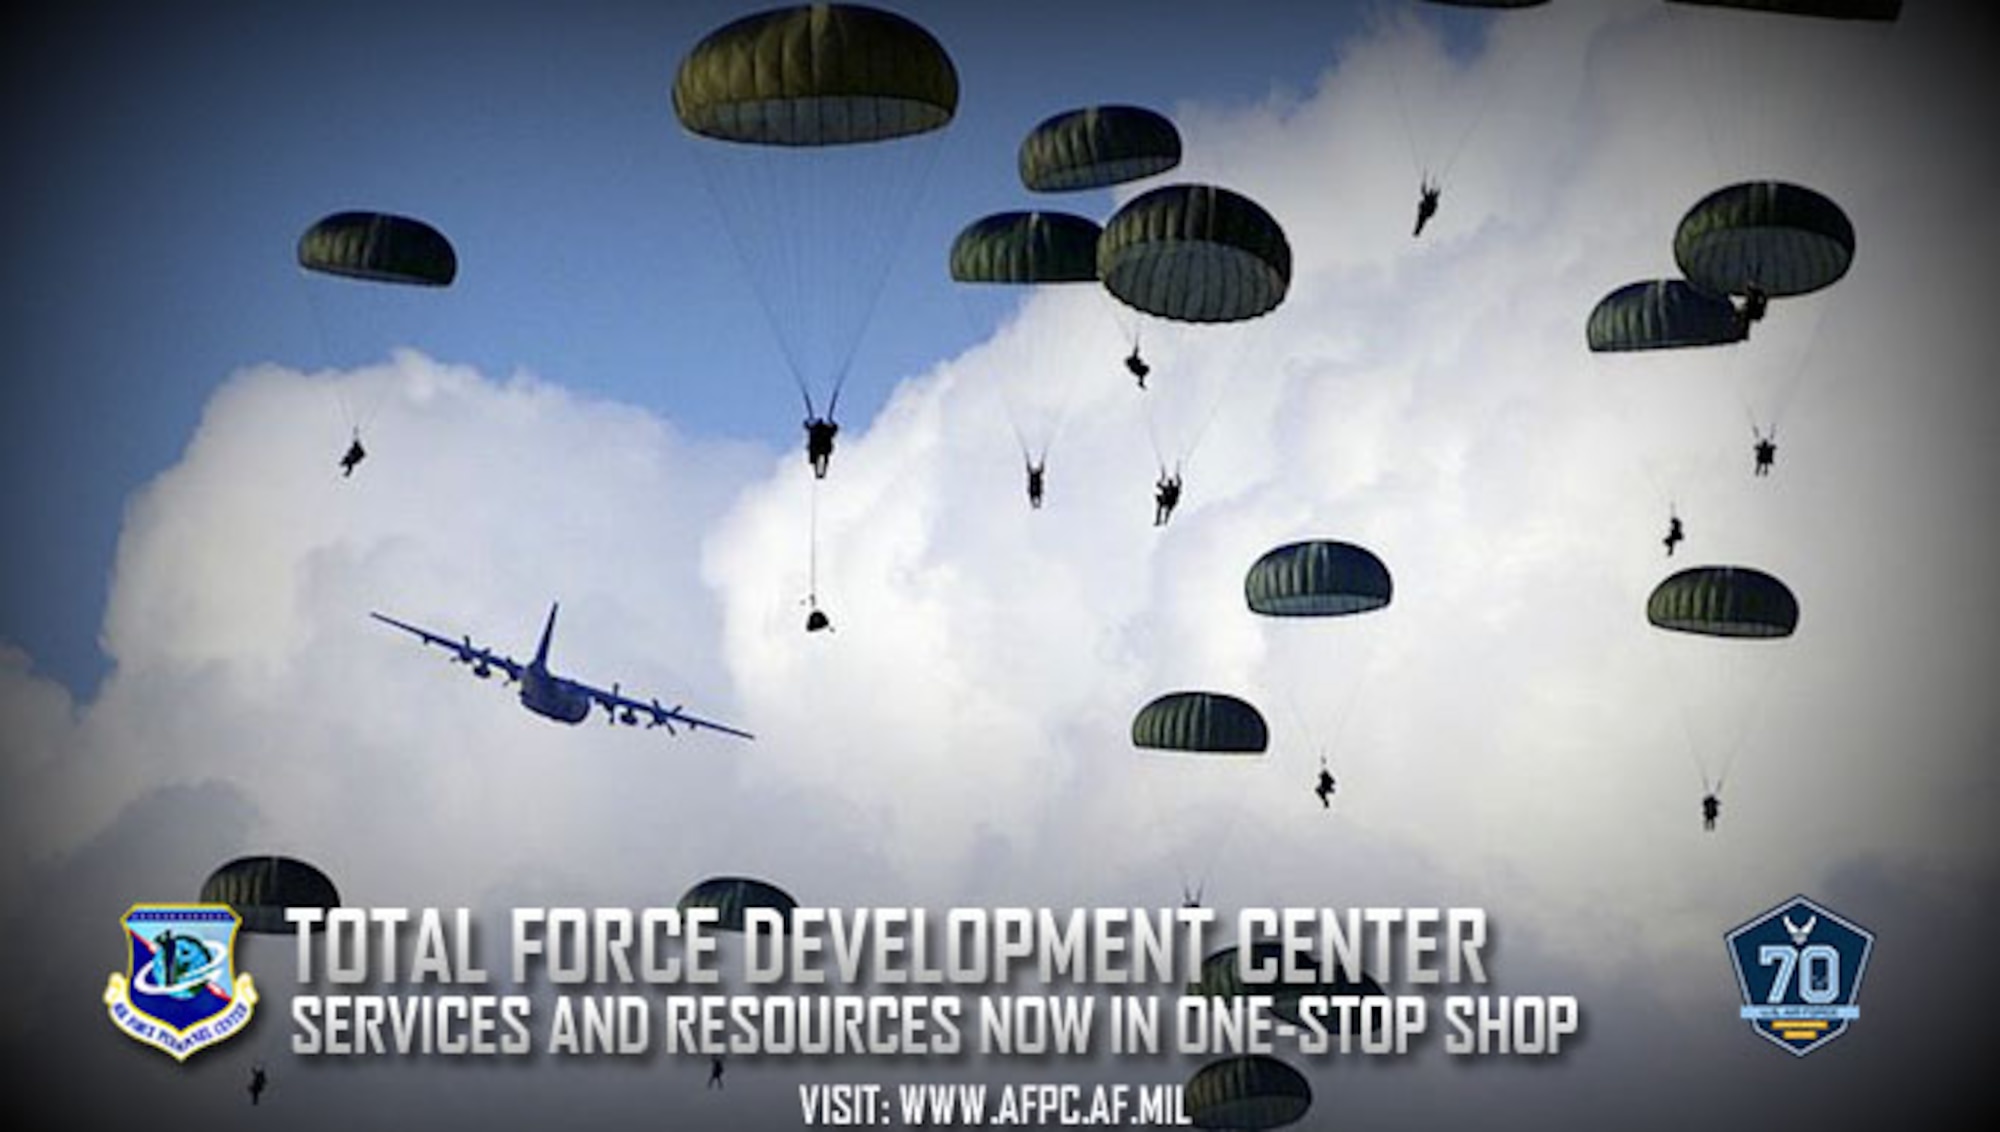 The Air Force has consolidated all total force development services and resources to a single-point center. All Airmen (active duty, Reserve, Guard and civilian) will now be able to fully utilize all force development resources through the virtual force development center. (U.S. Air Force graphic by Kat Bailey